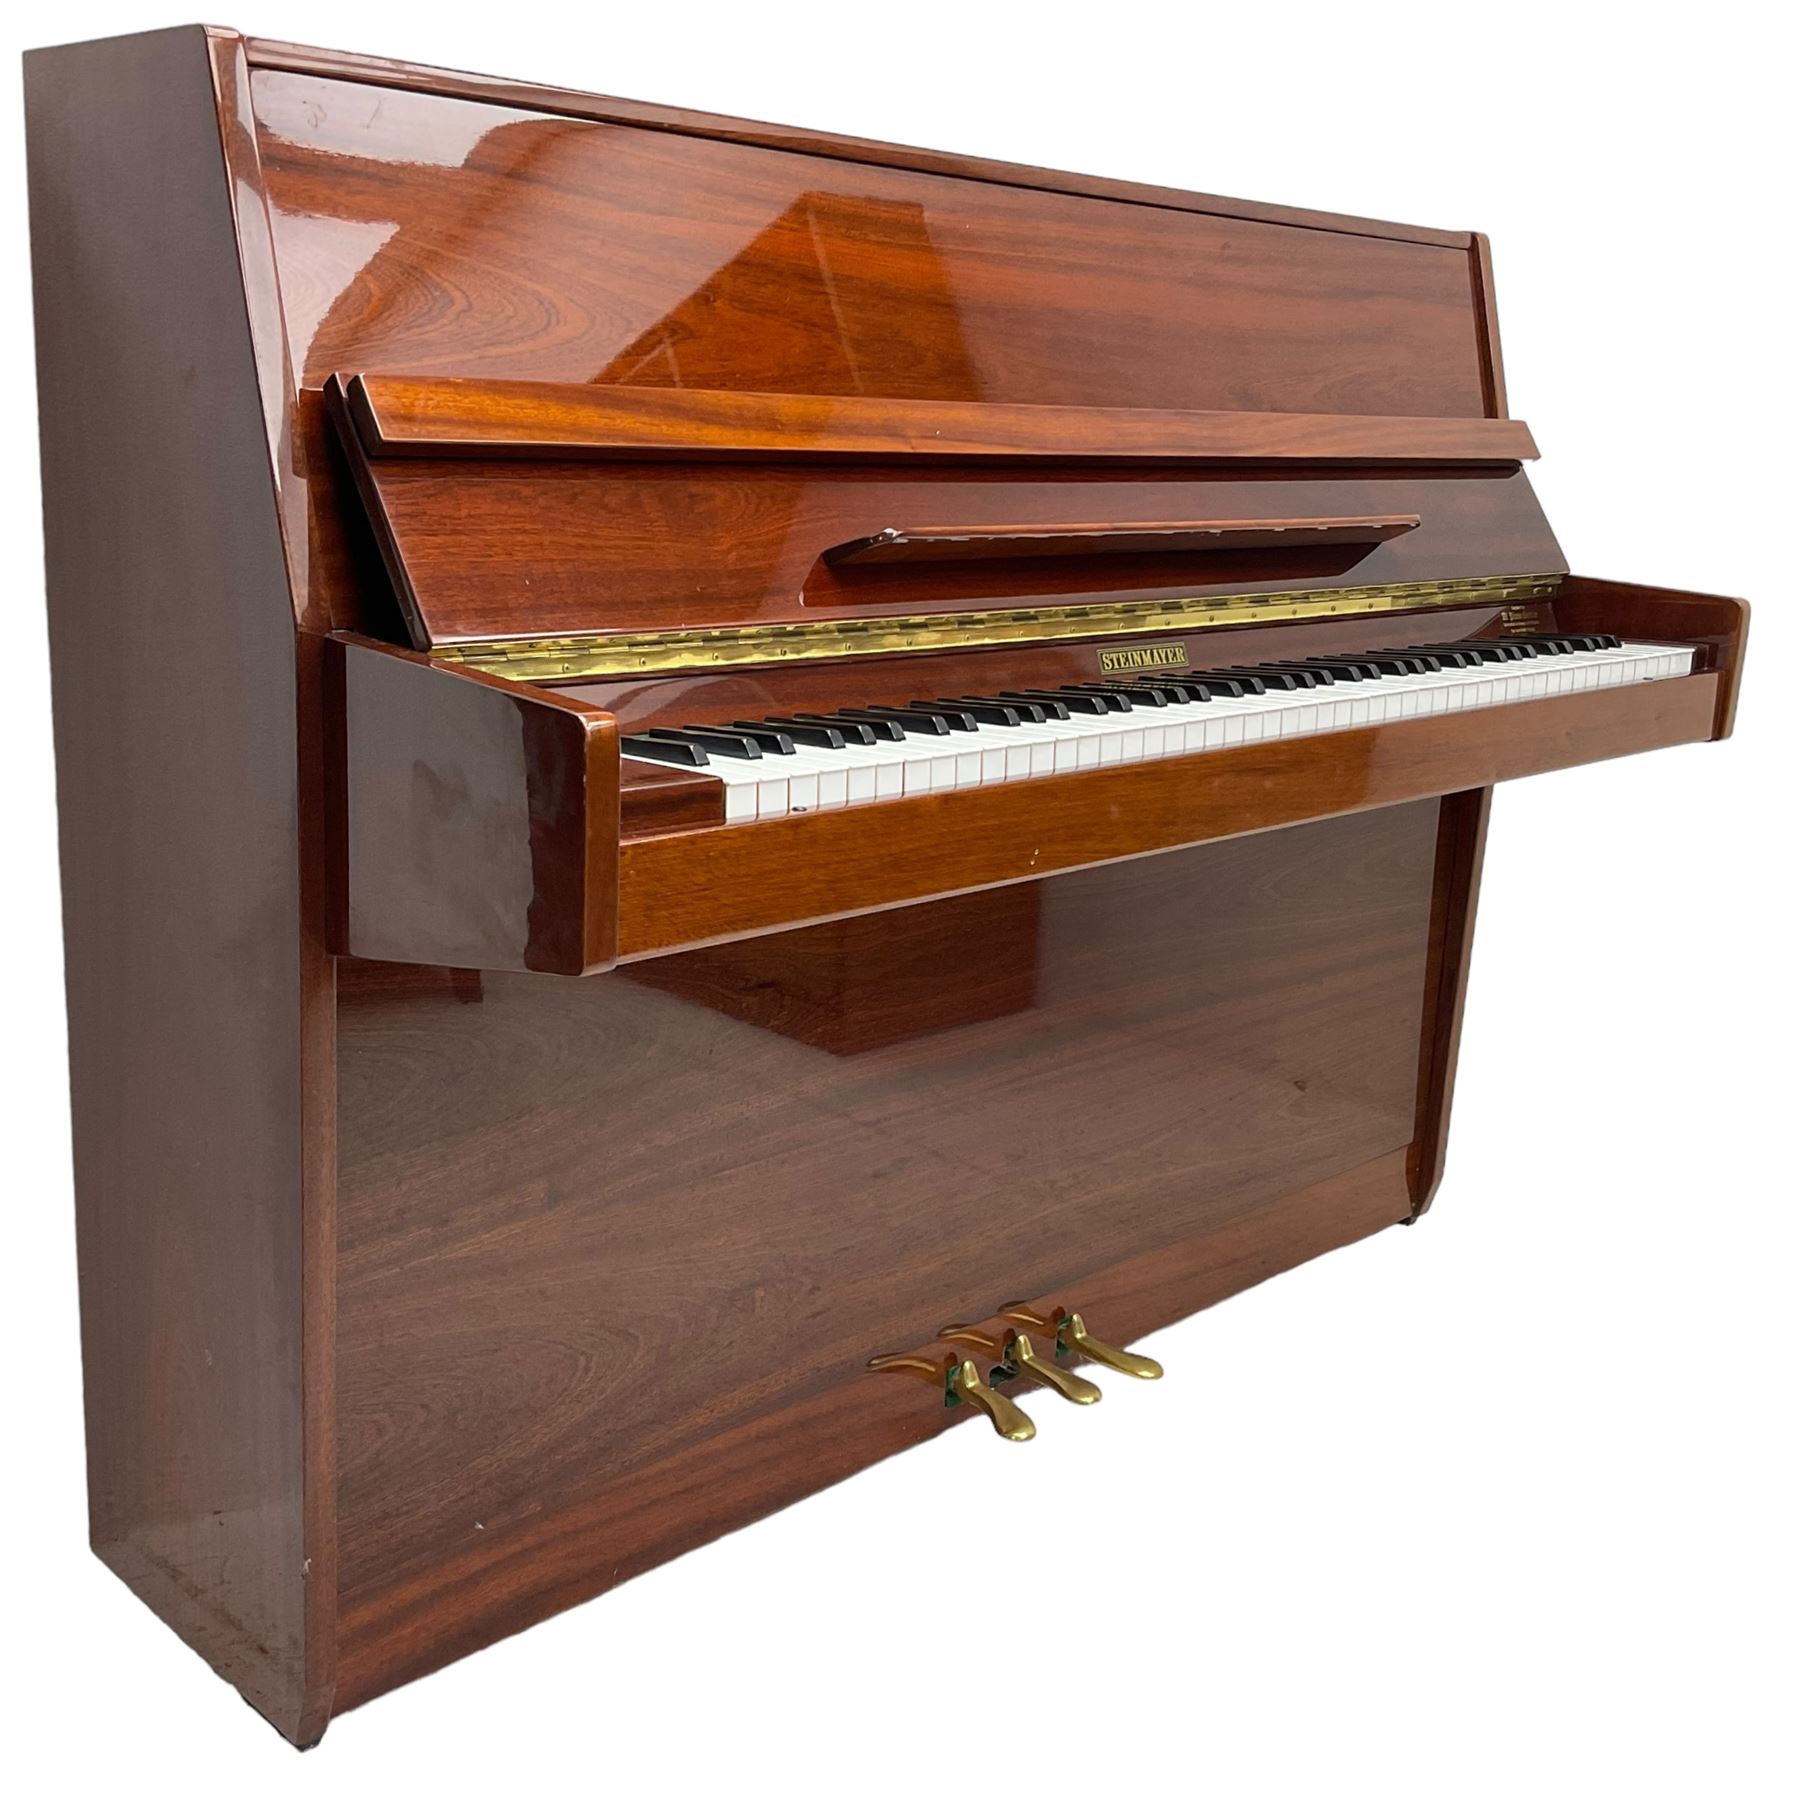 Steinmayer upright series 108 piano in sapele mahogany case - Image 2 of 11